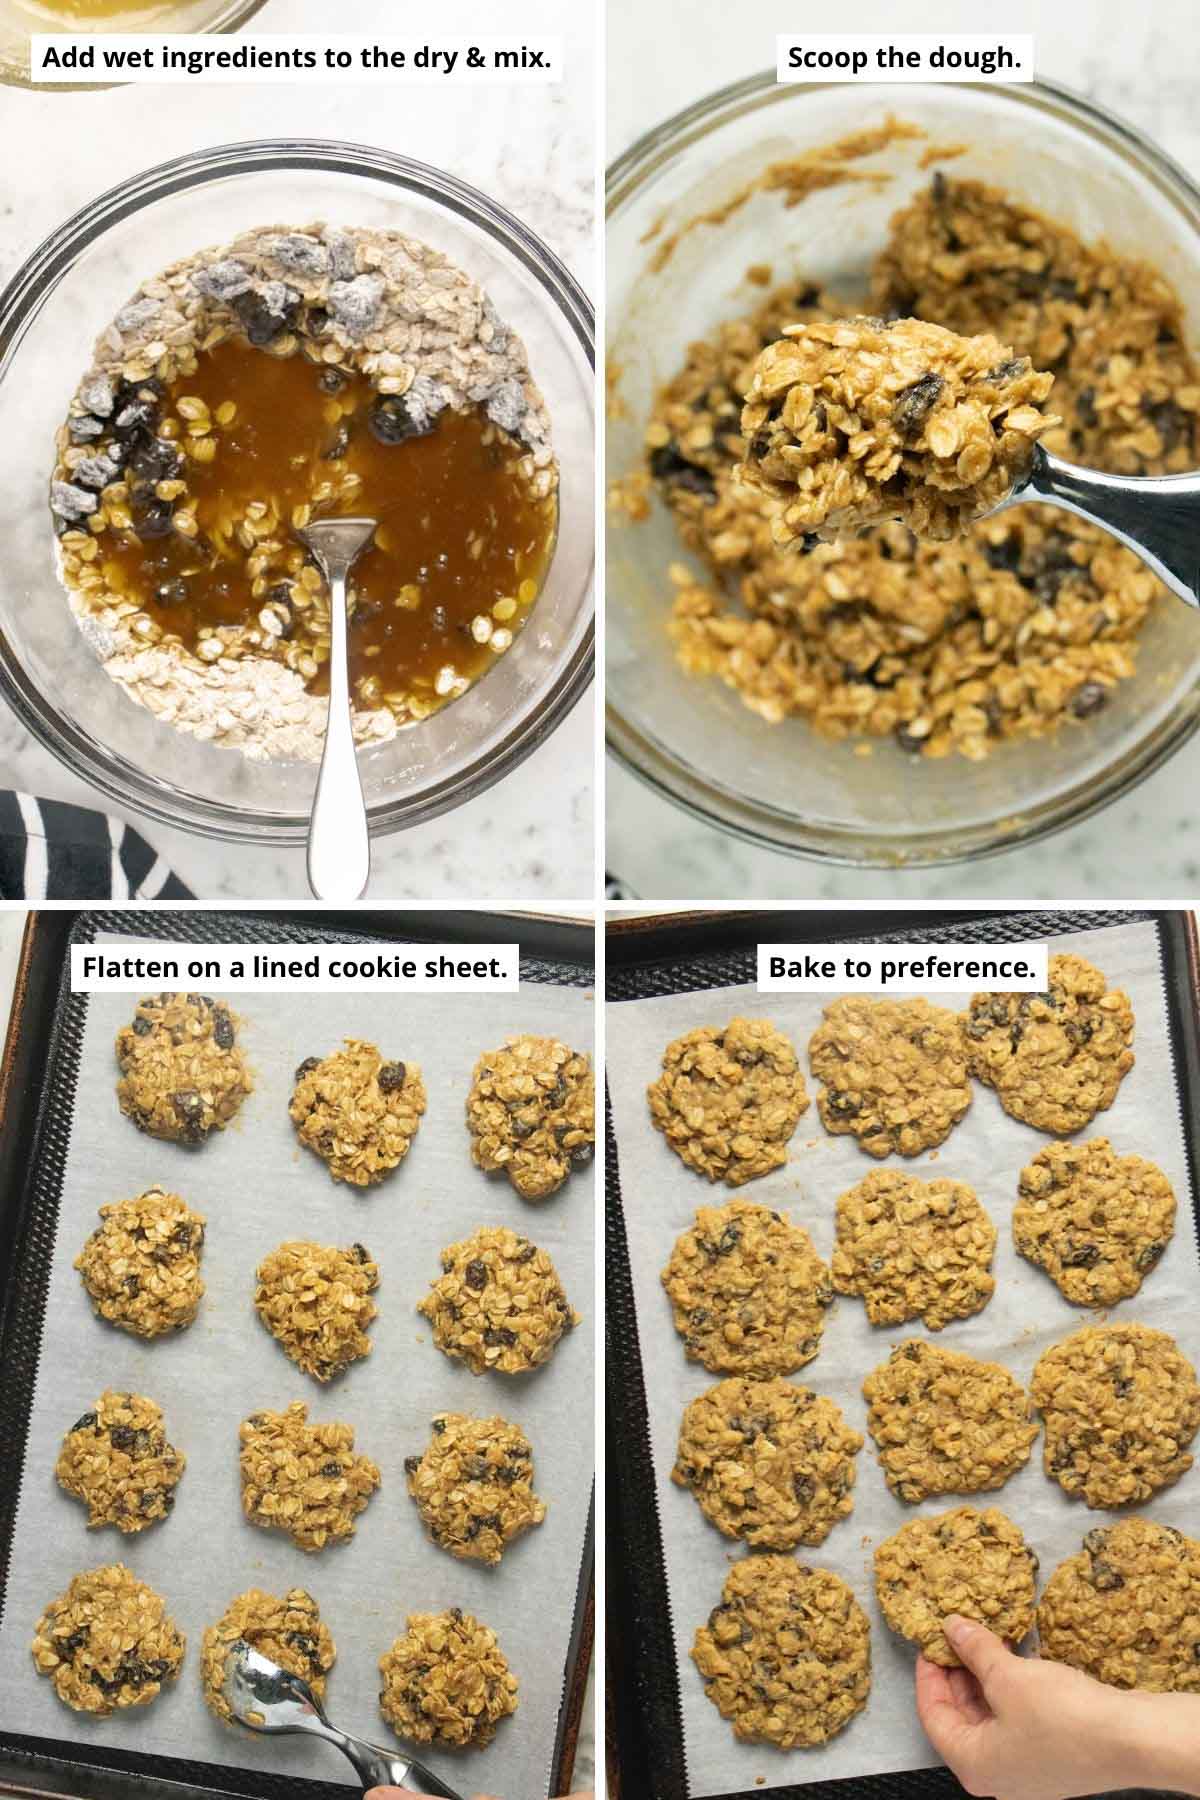 image collage showing adding wet ingredients to the dry, scooping the dough, and the dough on the cookie sheet before and after baking